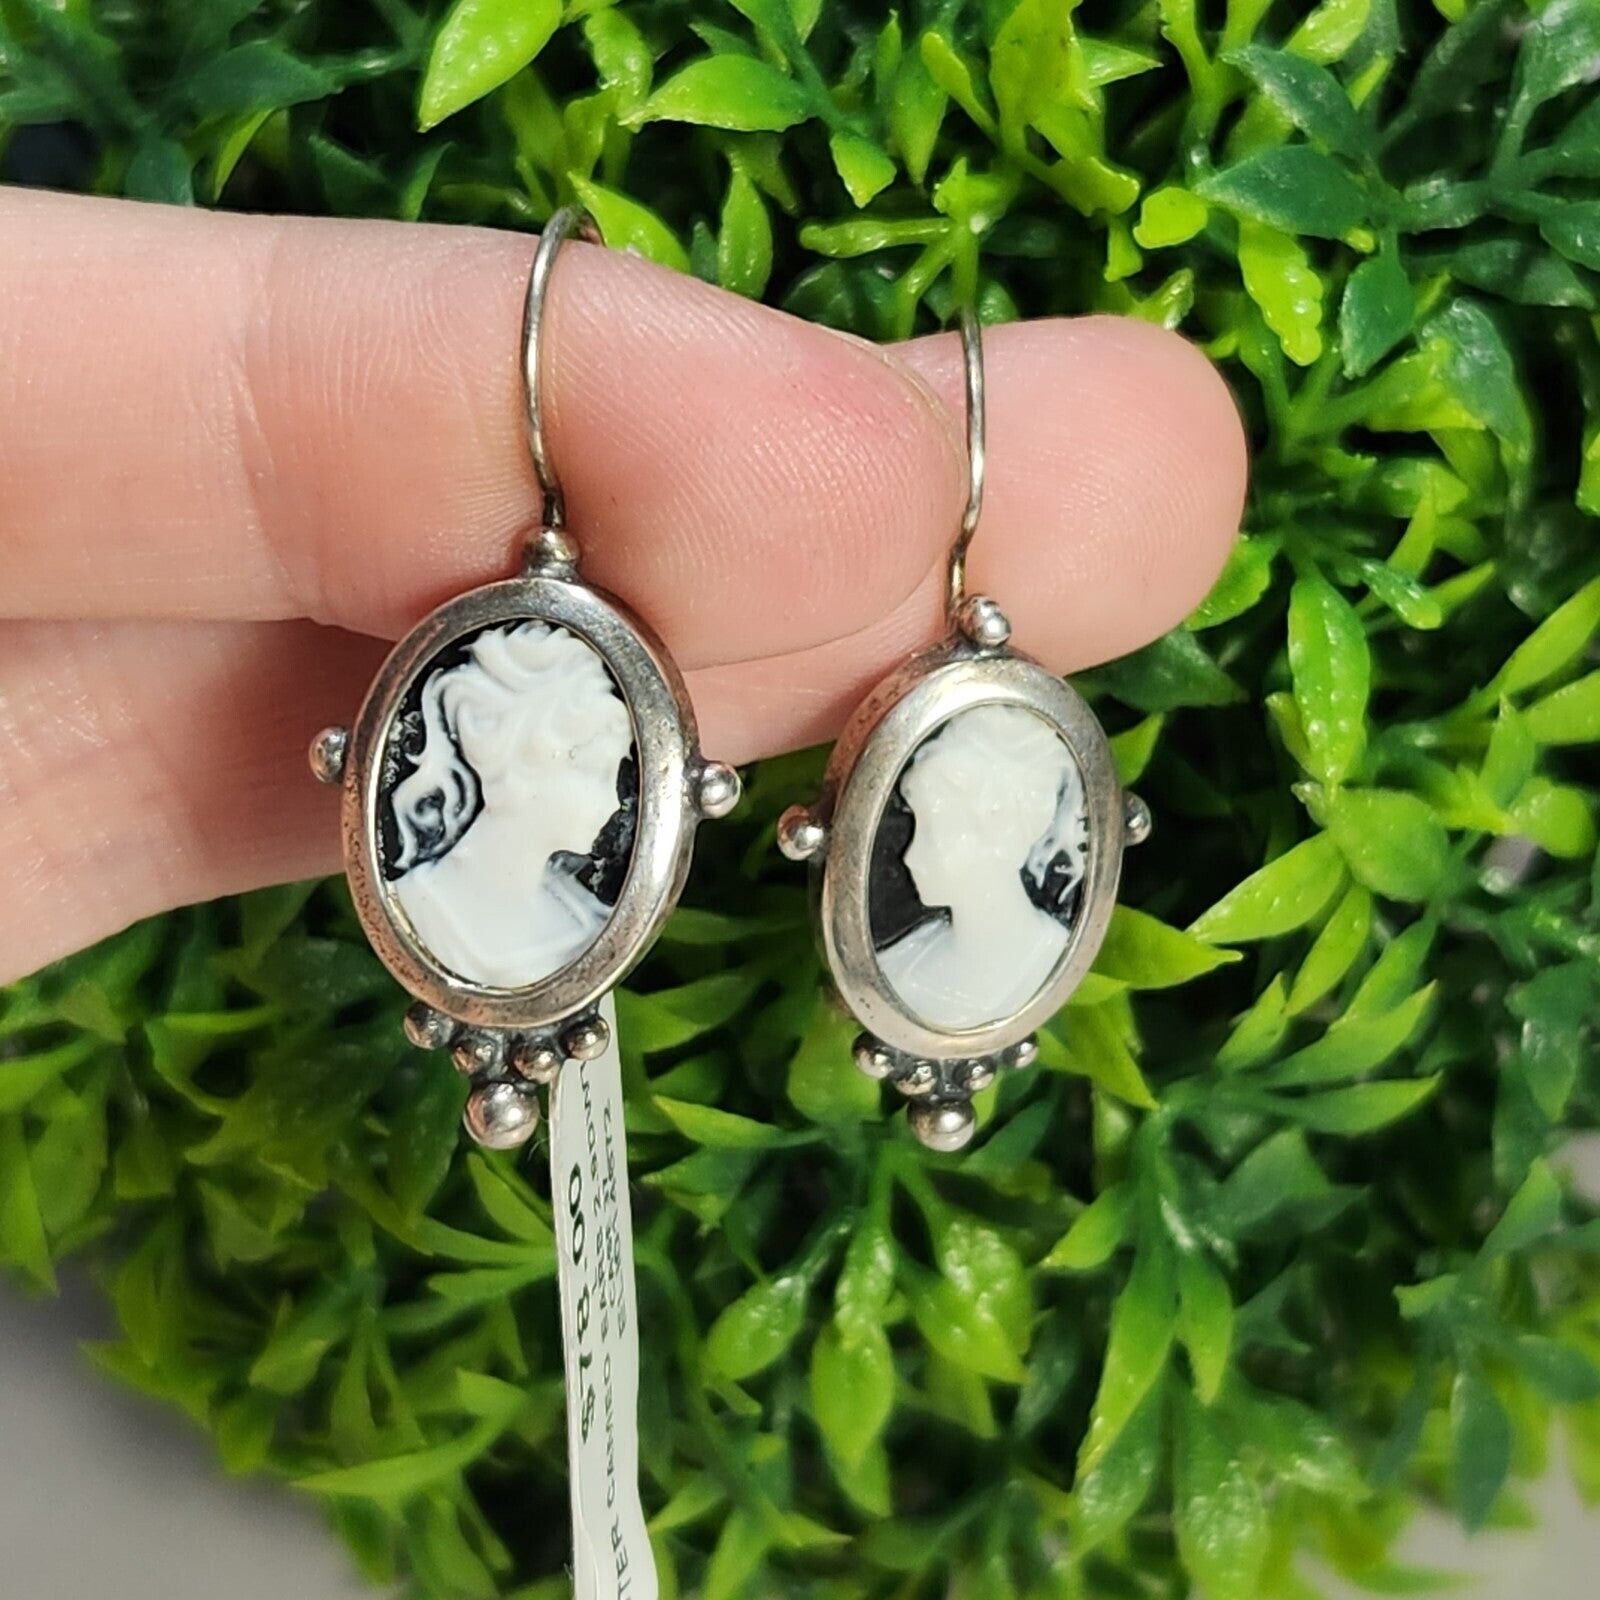 Collection Cameo Jewelry DIY Project Pins Earrings Lockets Repurpose – Olde  Kitchen & Home